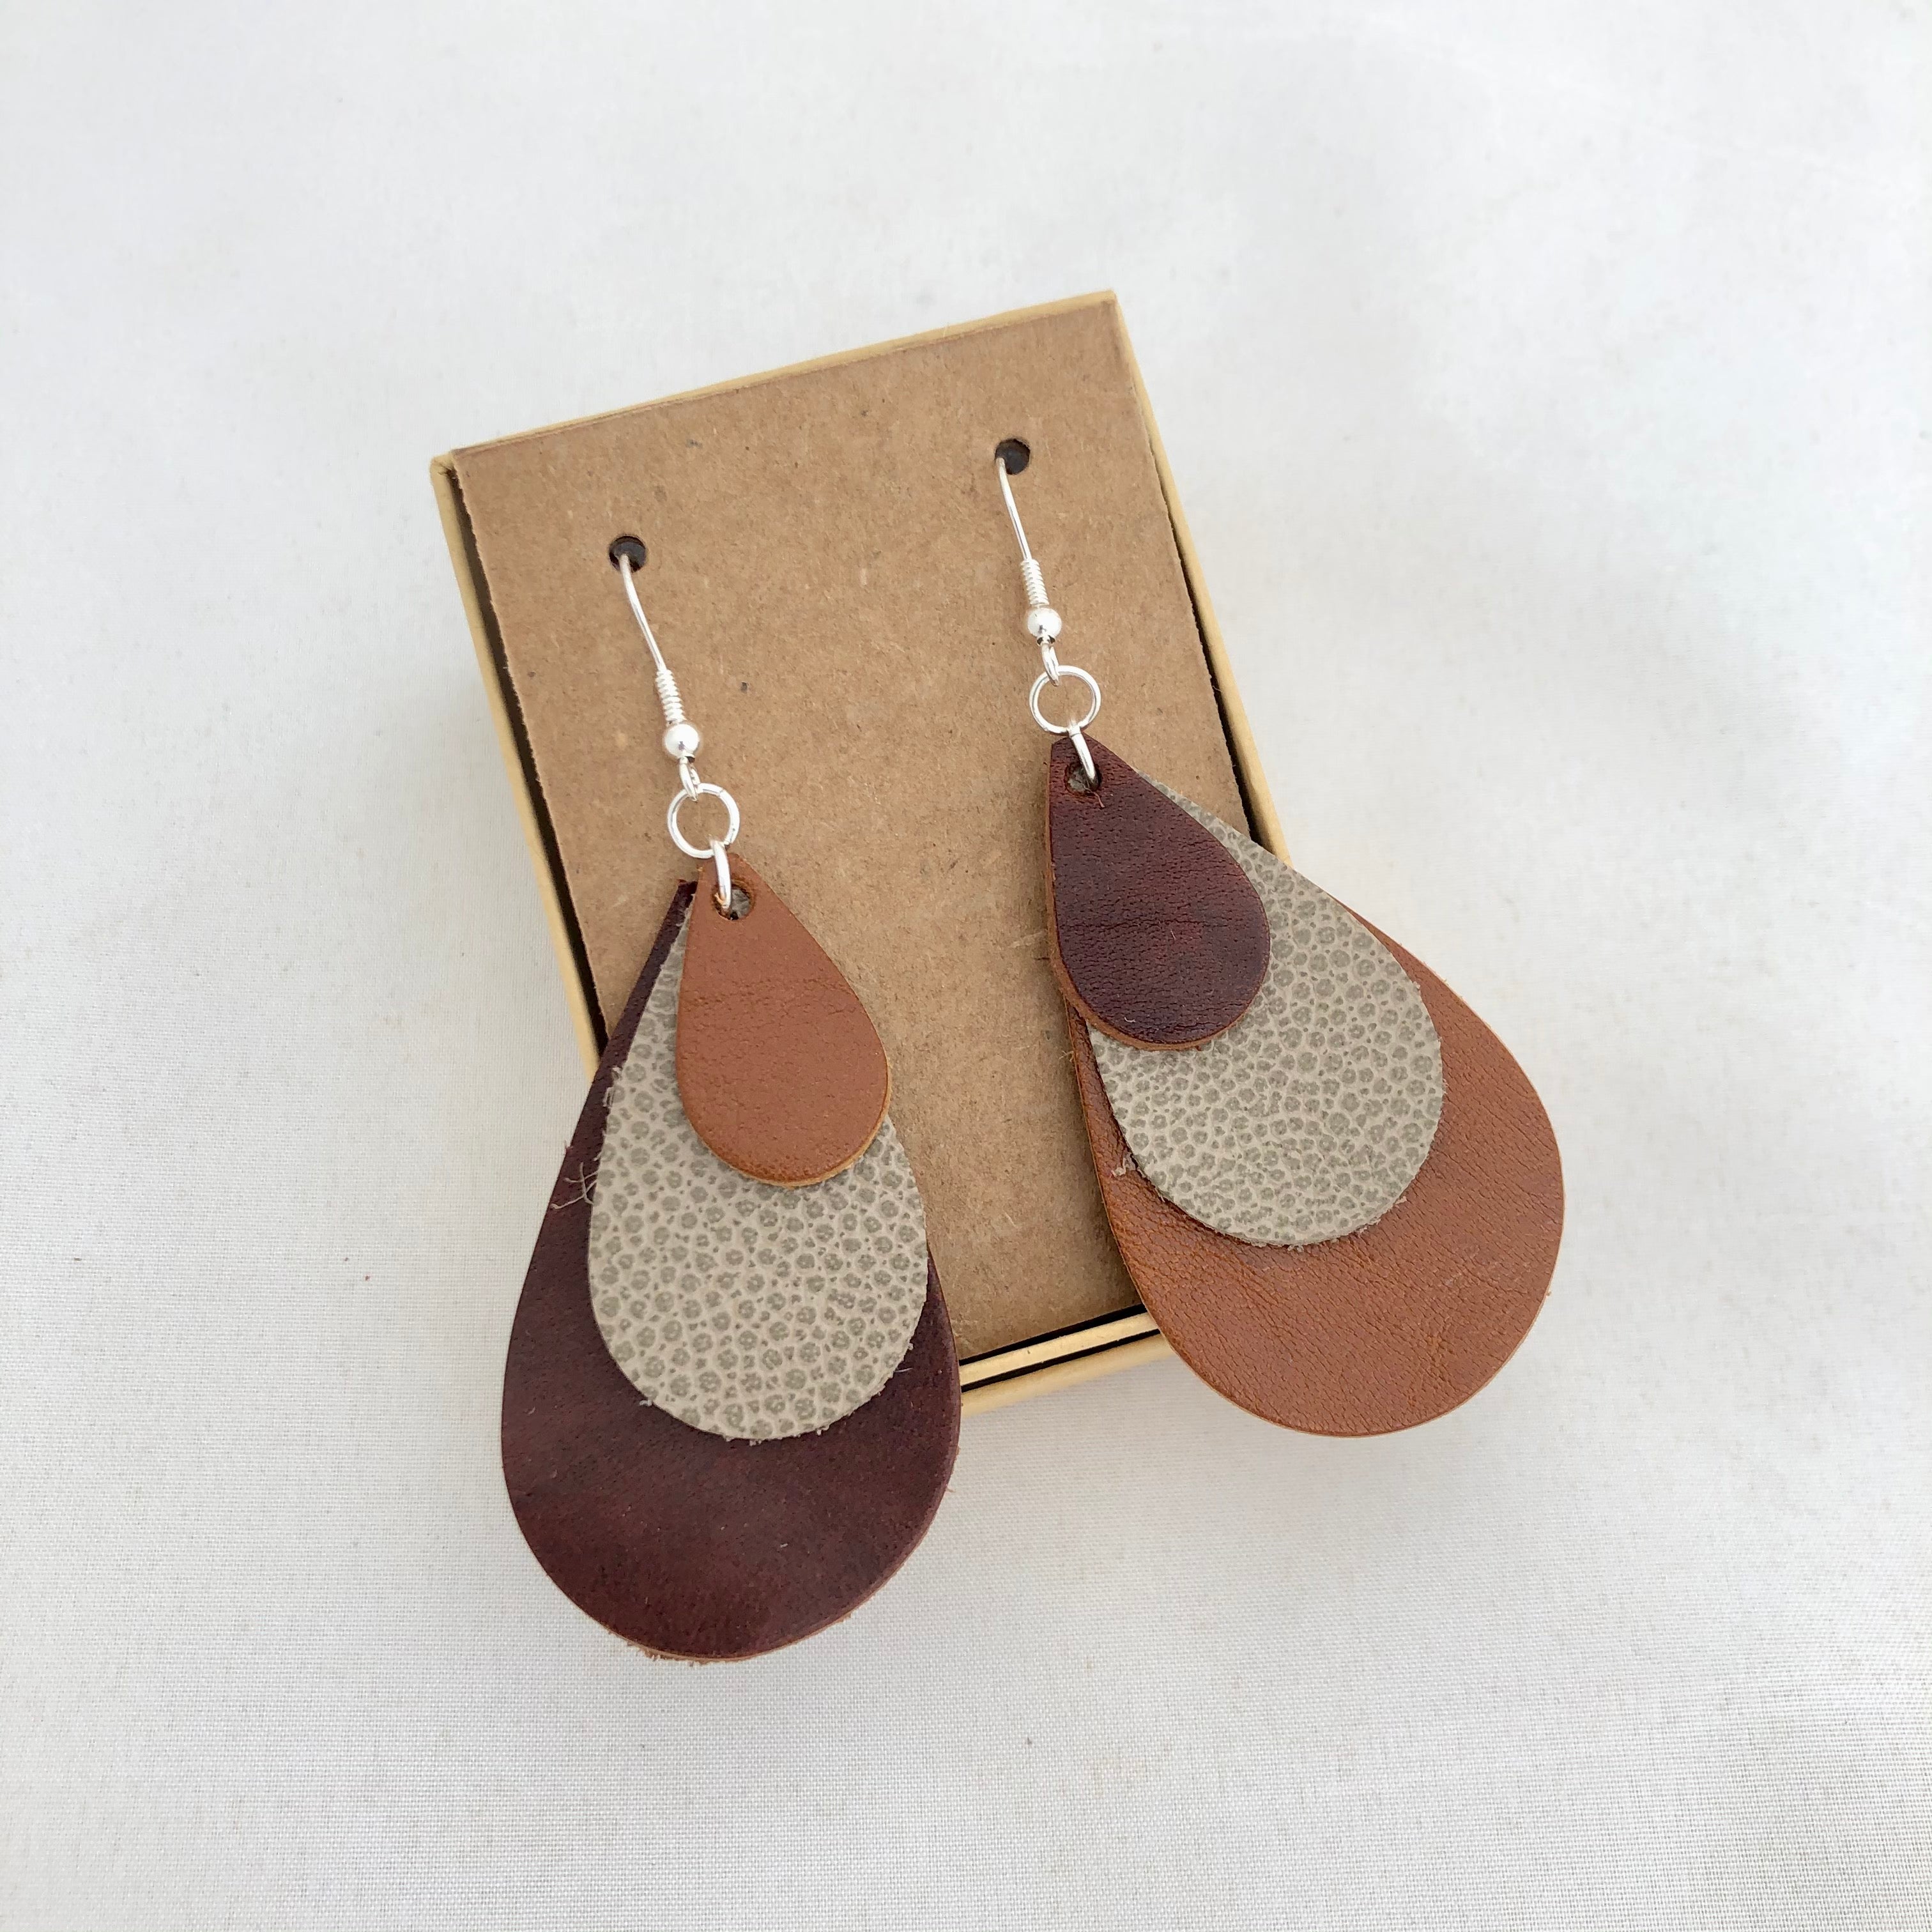 Tri Color Rainbow Earrings in Shades of Brown. This pair of earrings features a mix-matched order of color, so one earring is light brown, spotted tan, and dark brown, whereas the other is dark brown, spotted brown, and light brown. The earrings are pictured on a brown card in a brown jewelry box, which both come included with the earrings. They are pictured against a white background.